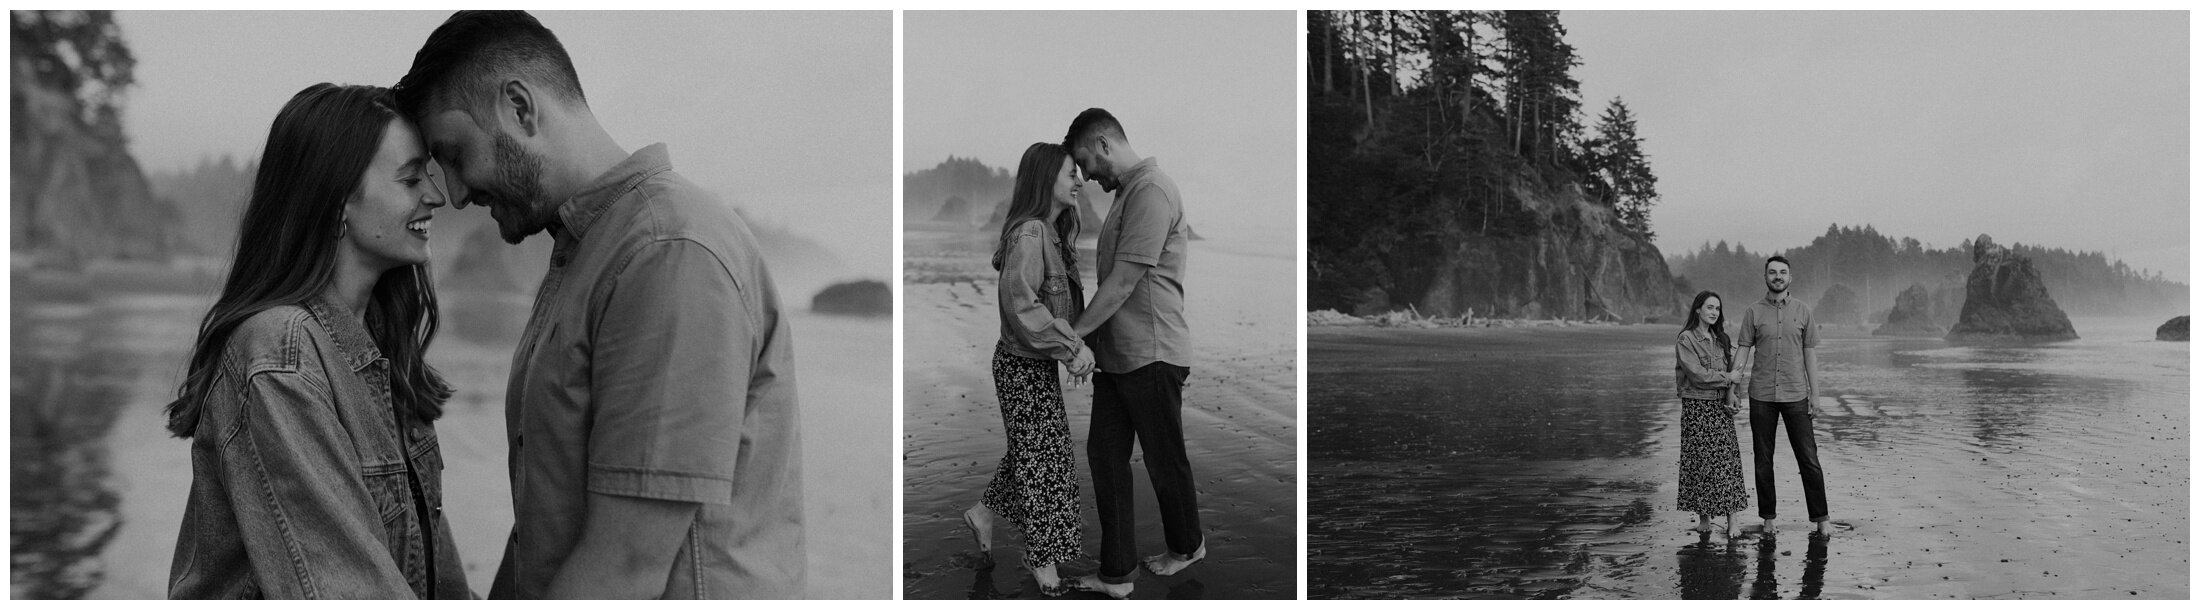 Ruby Beach Engagement Session by Jessica Heron Images_0012.jpg